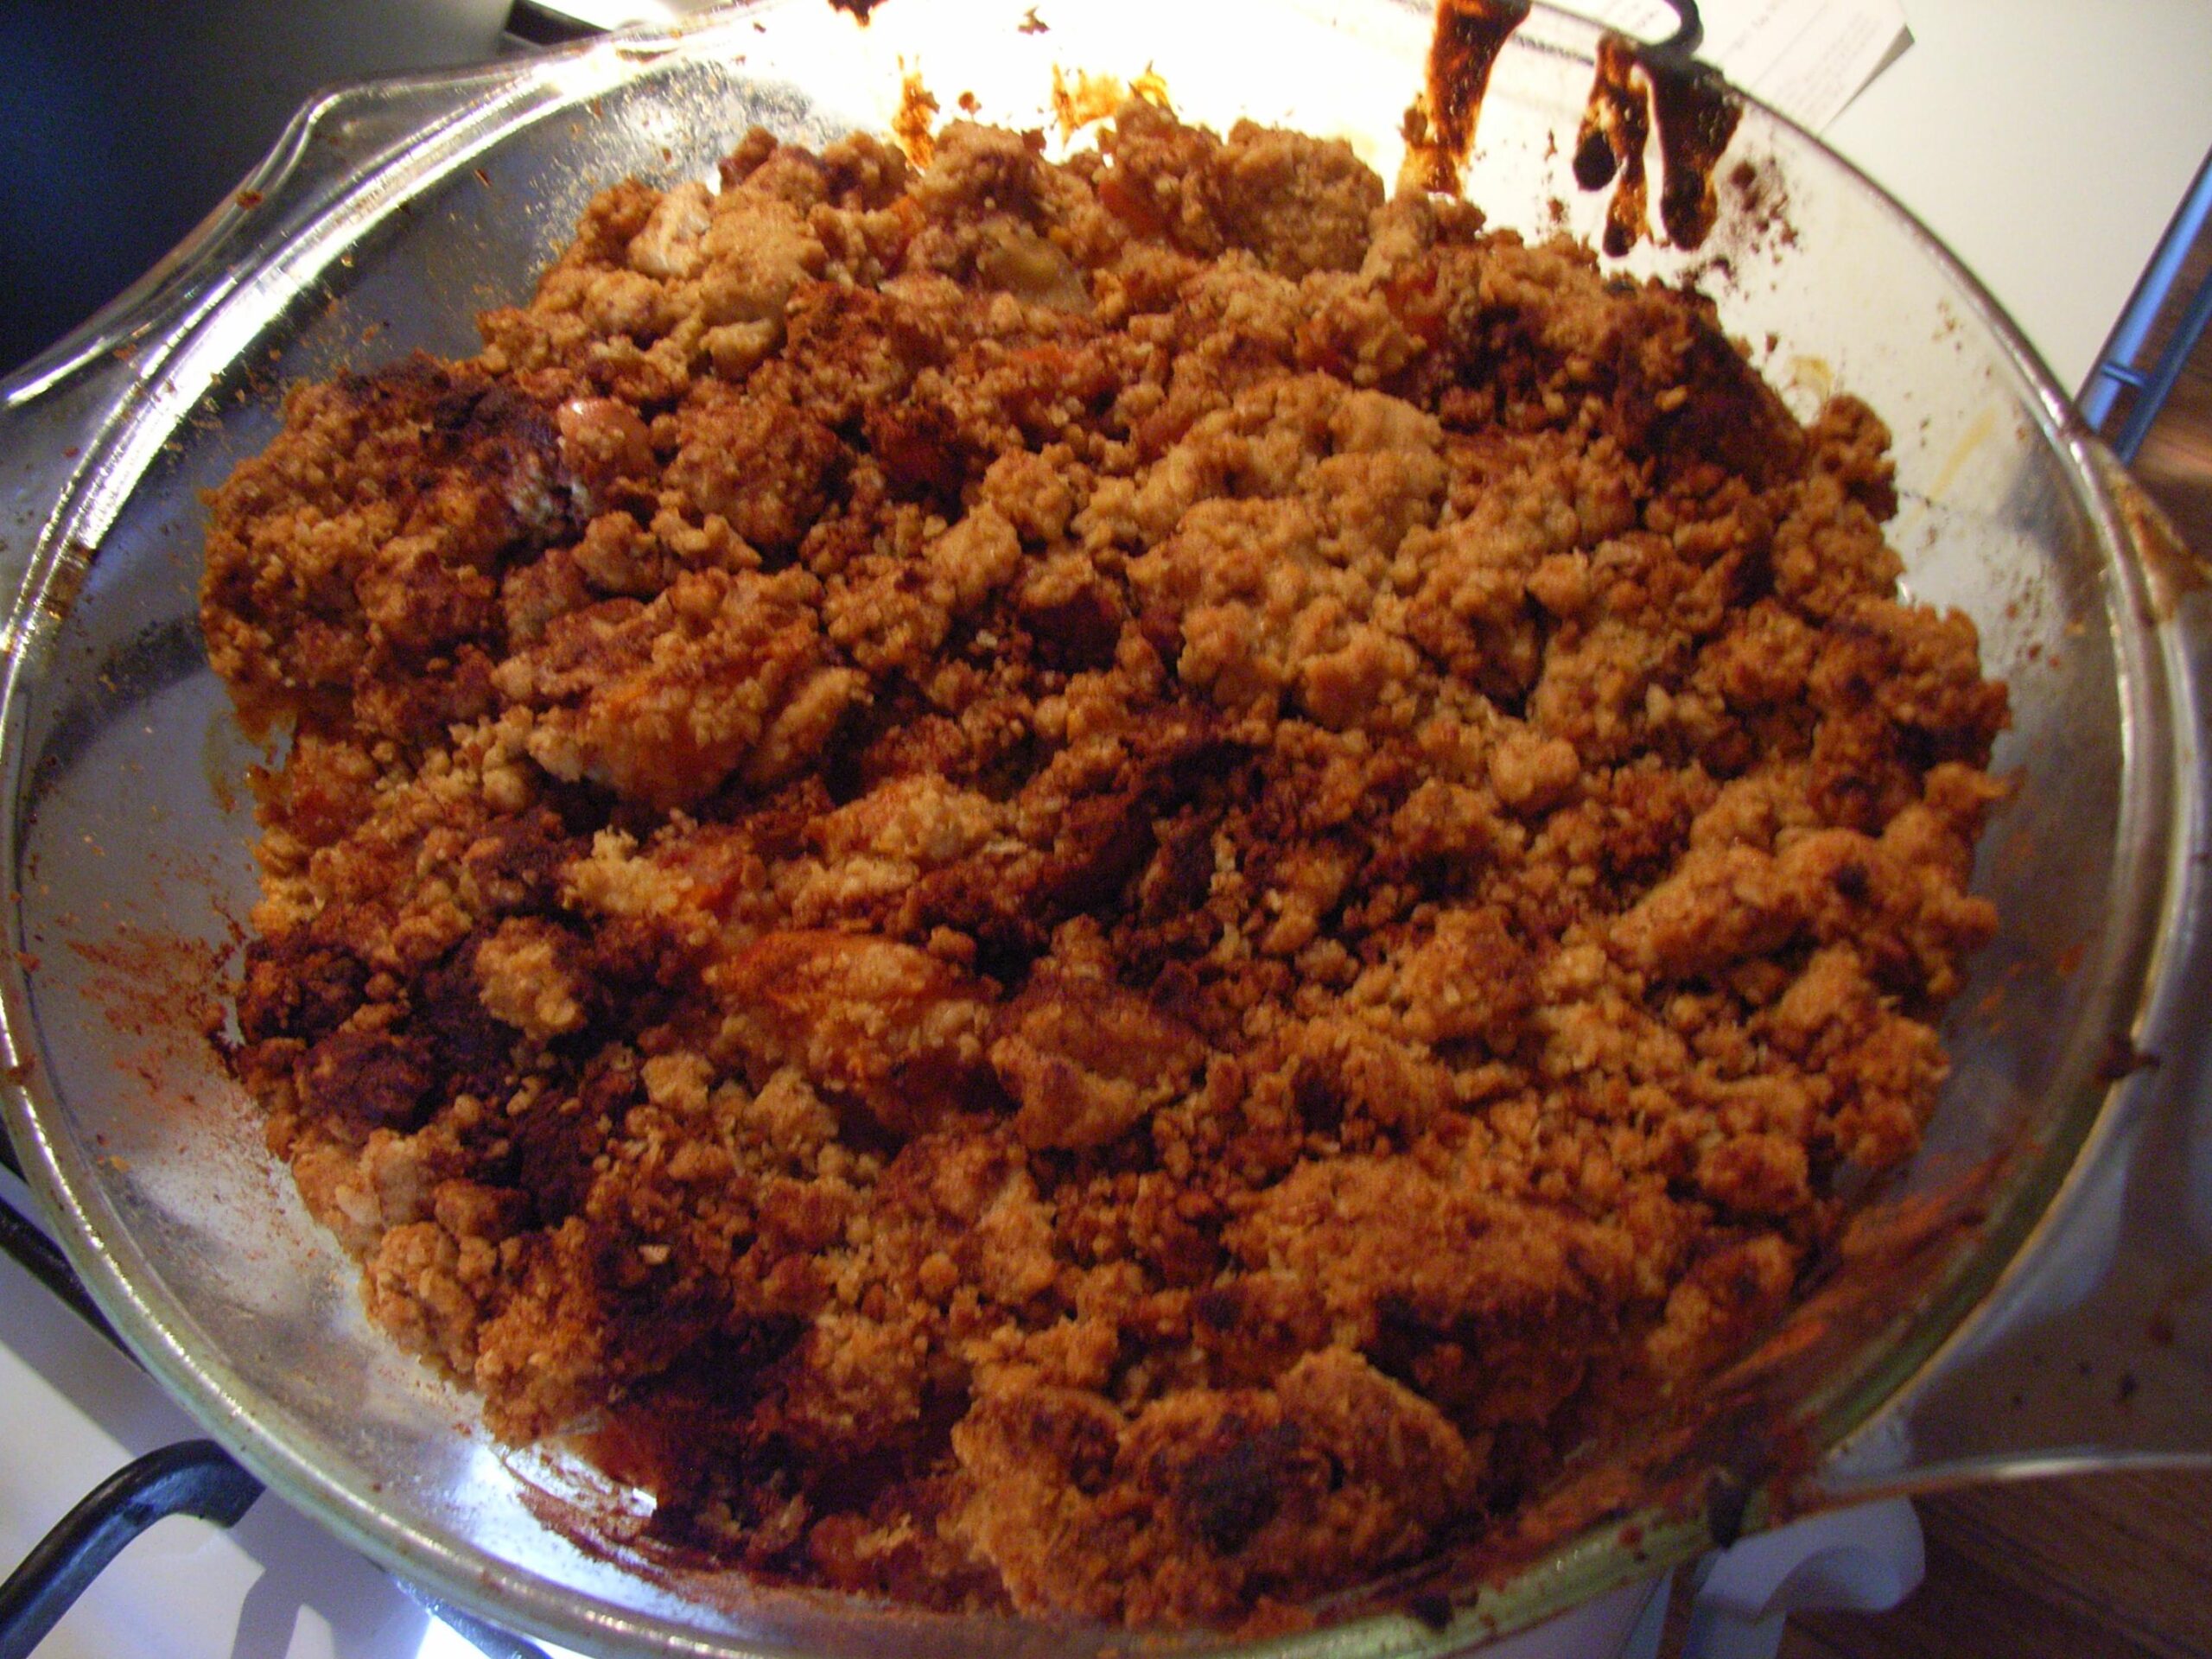  Say goodbye to the old and hello to the new with this easy-to-make apple crumble.